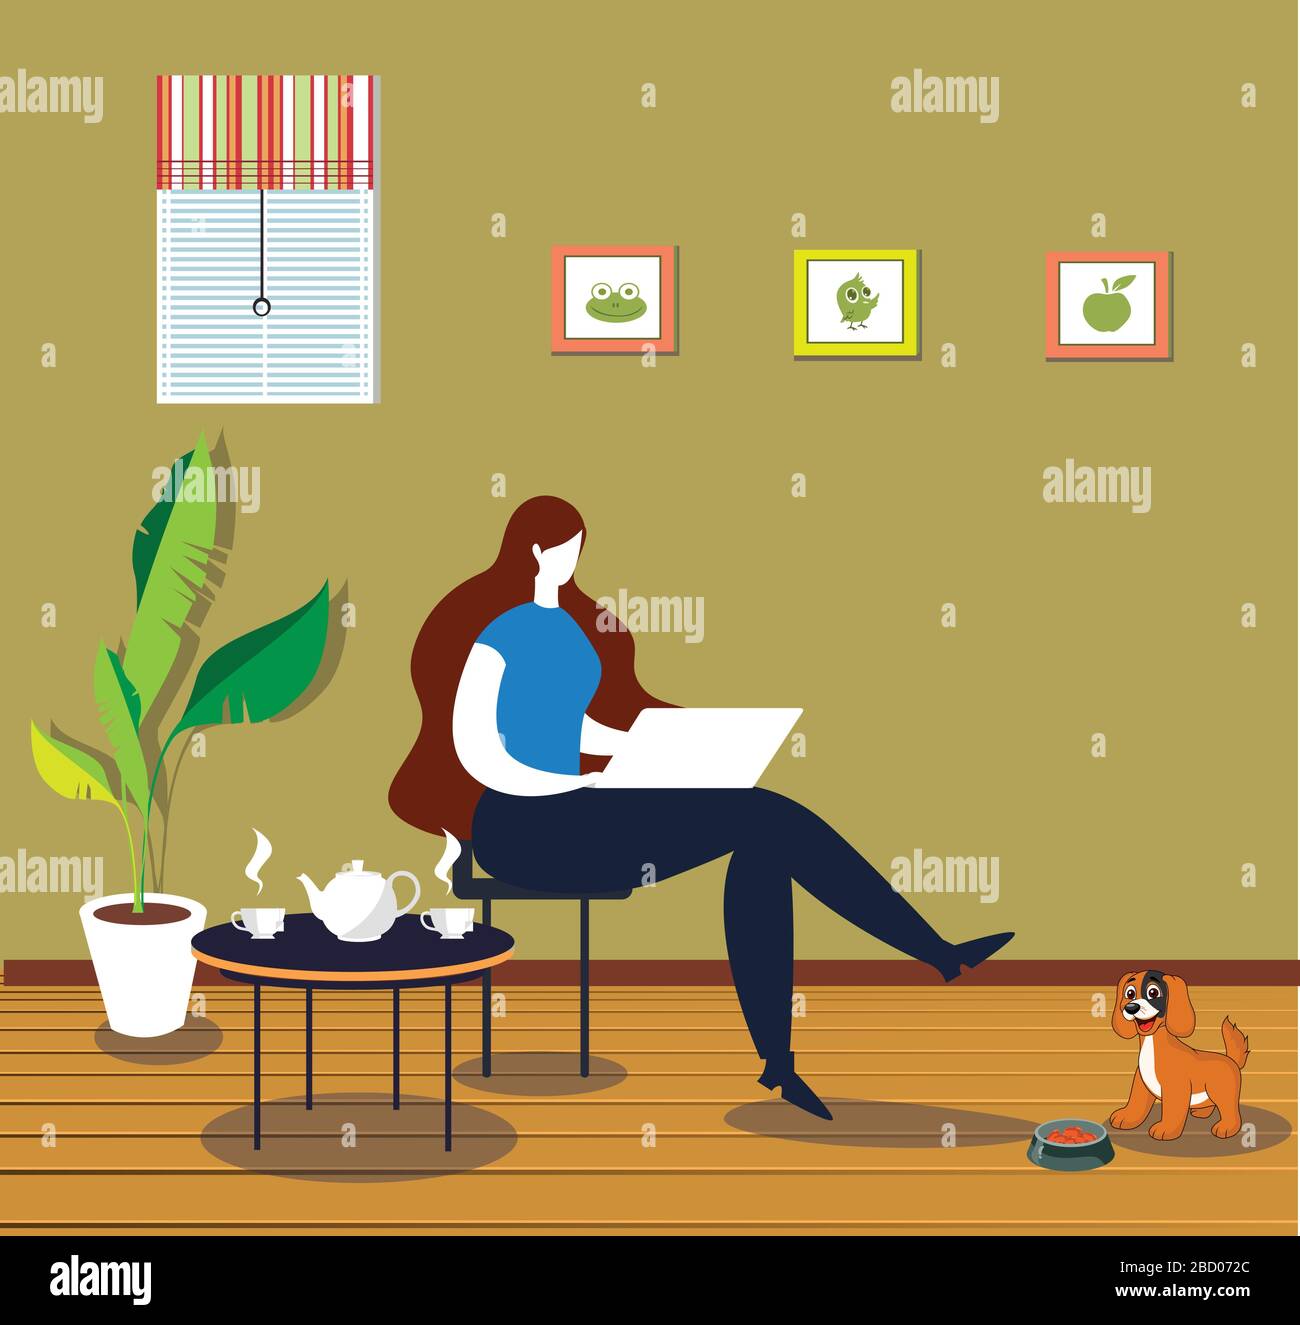 Women work at home. Women sitting on a chair working from home. Stock Vector